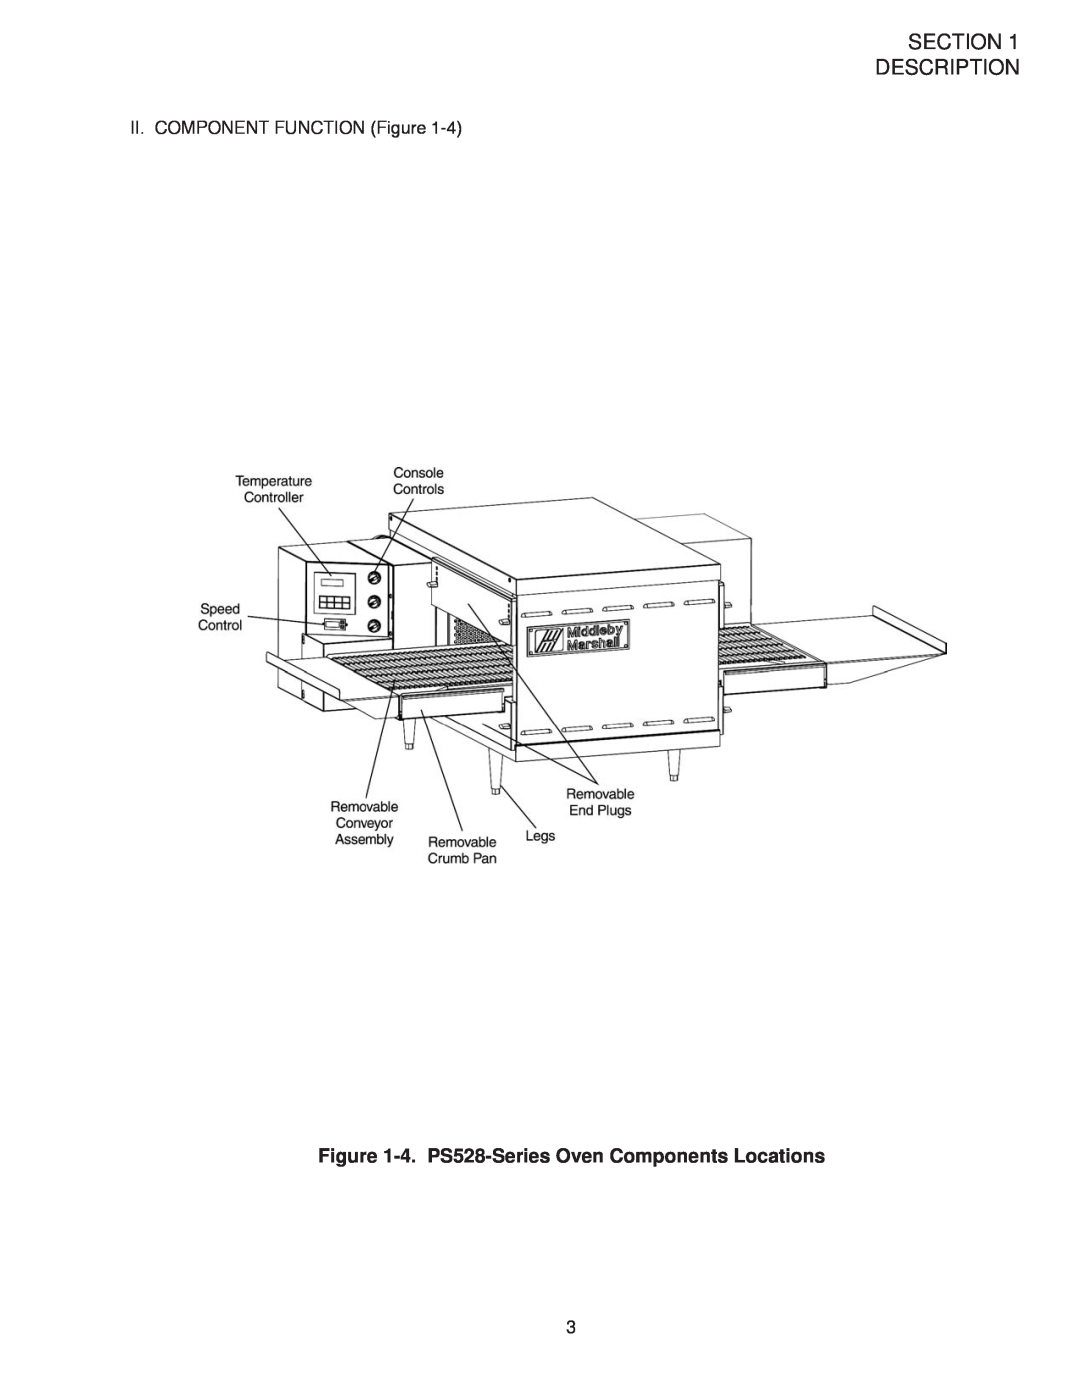 Middleby Marshall PS528G Section Description, 4. PS528-Series Oven Components Locations, II. COMPONENT FUNCTION Figure 